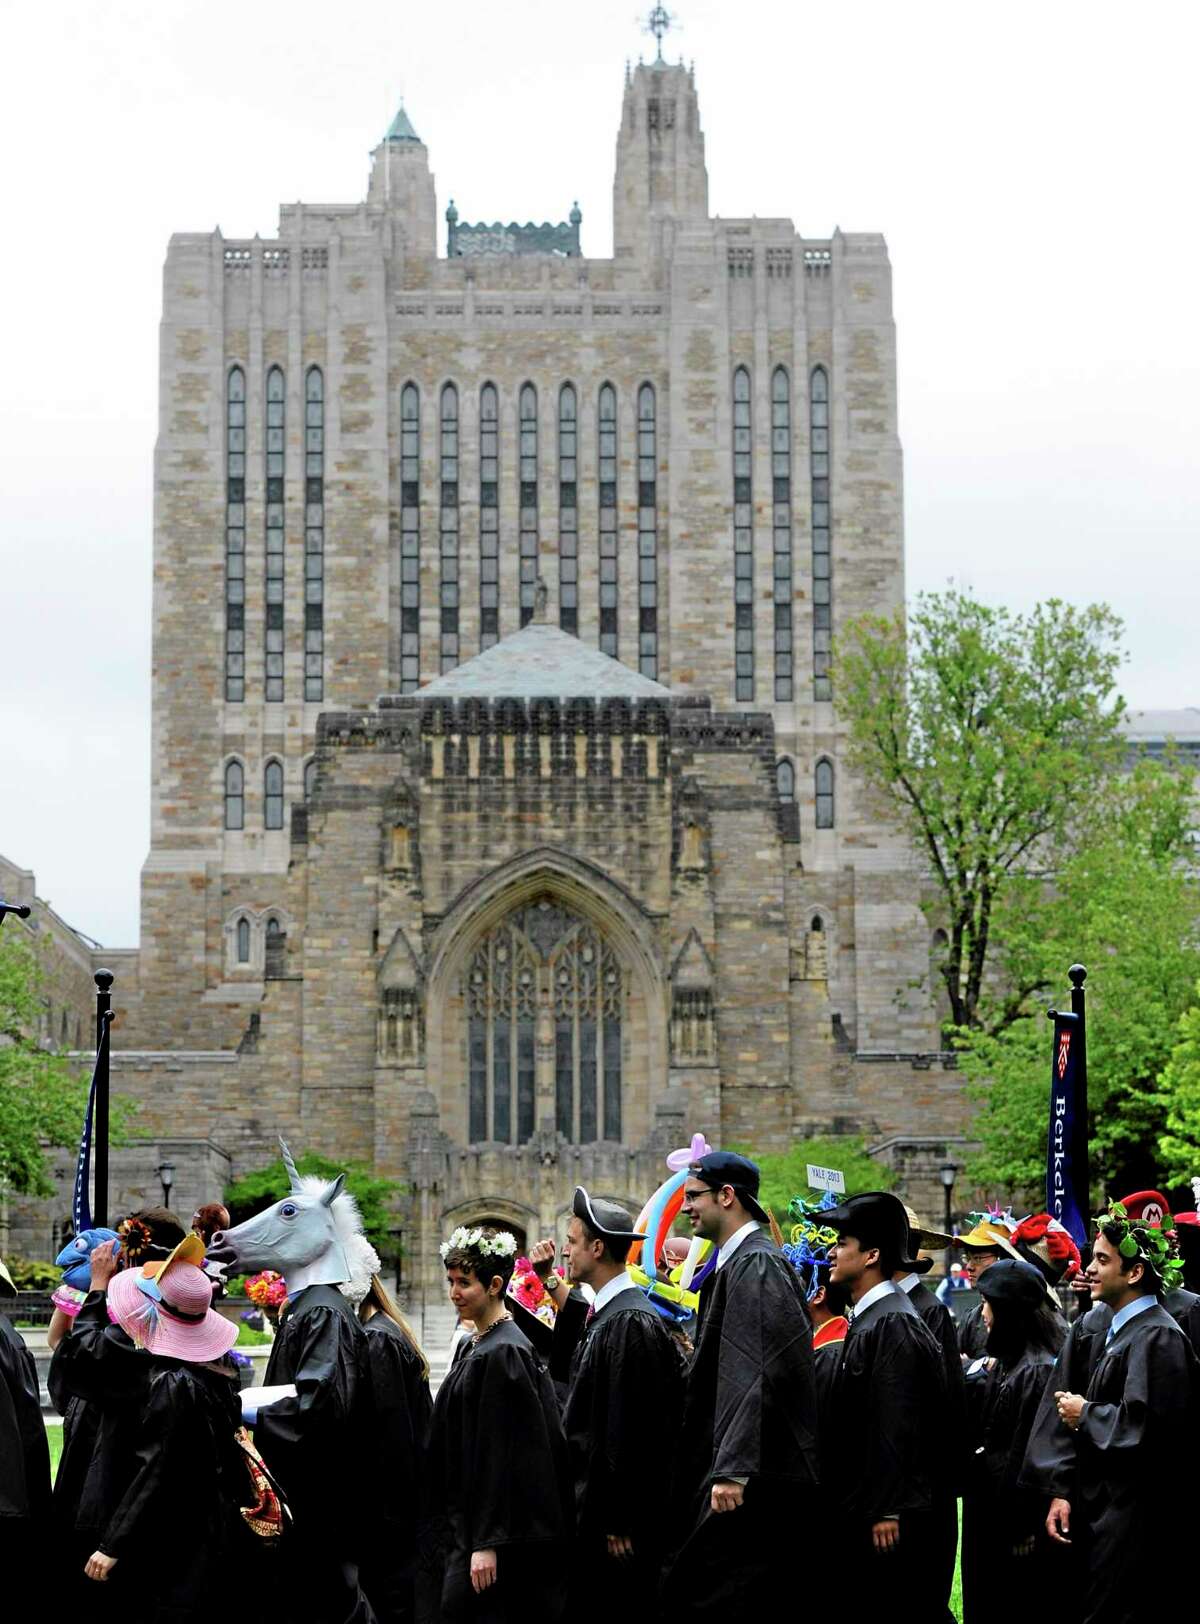 Students wearing decorative hats line up for the procession during Class Day for Yale seniors at Yale University in New Haven, Conn., Sunday, May 19, 2013. (AP Photo/Jessica Hill)